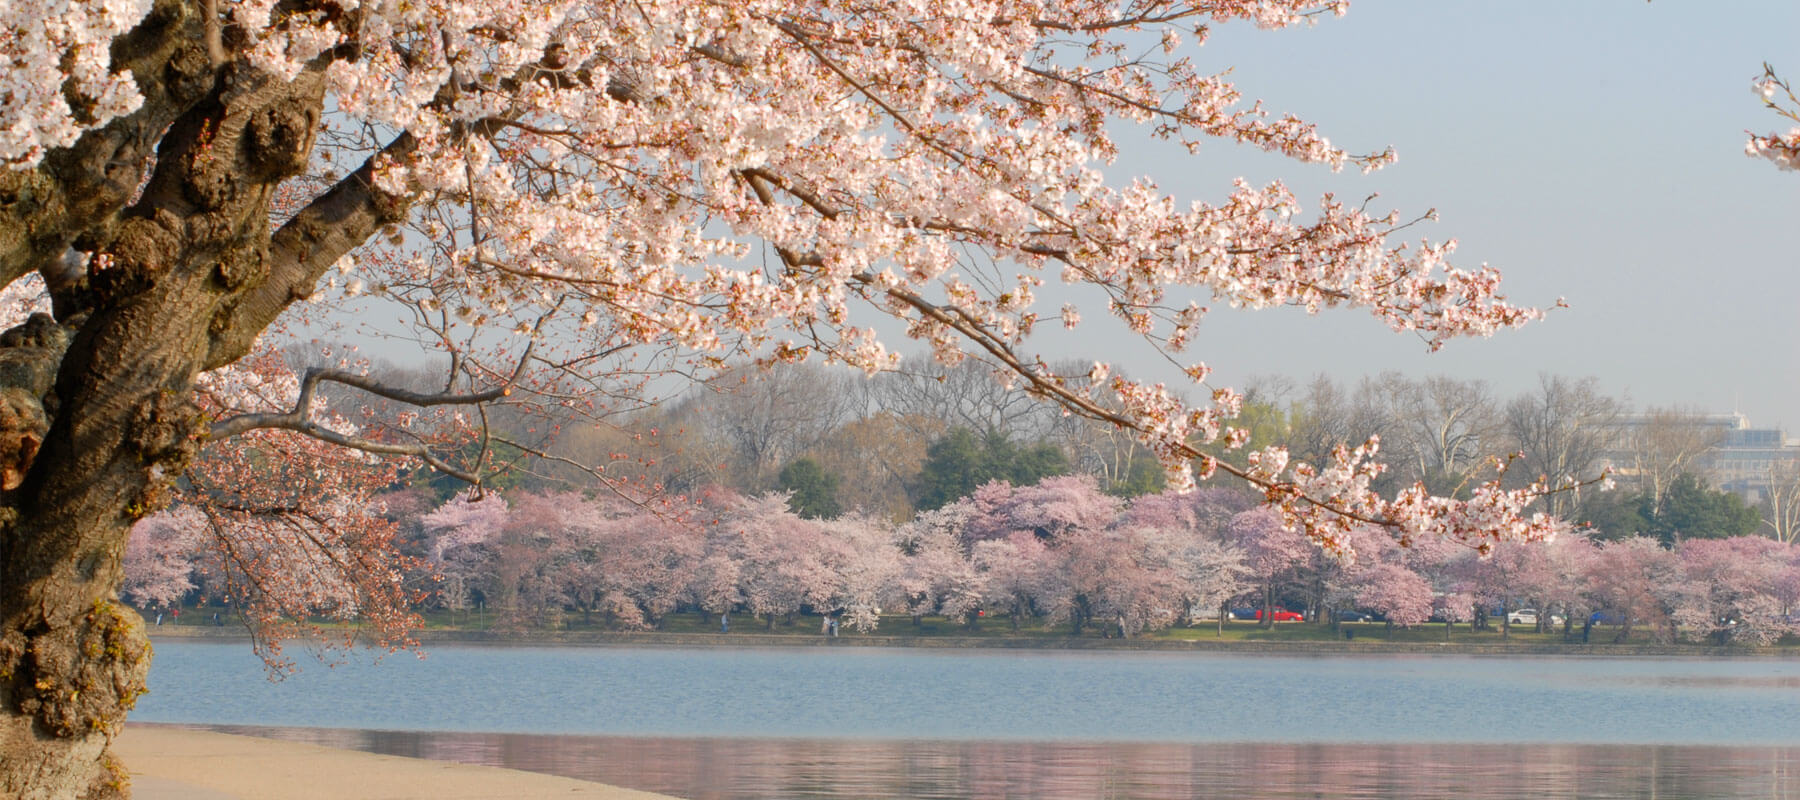 History of the National Cherry Blossom Festival in Washington